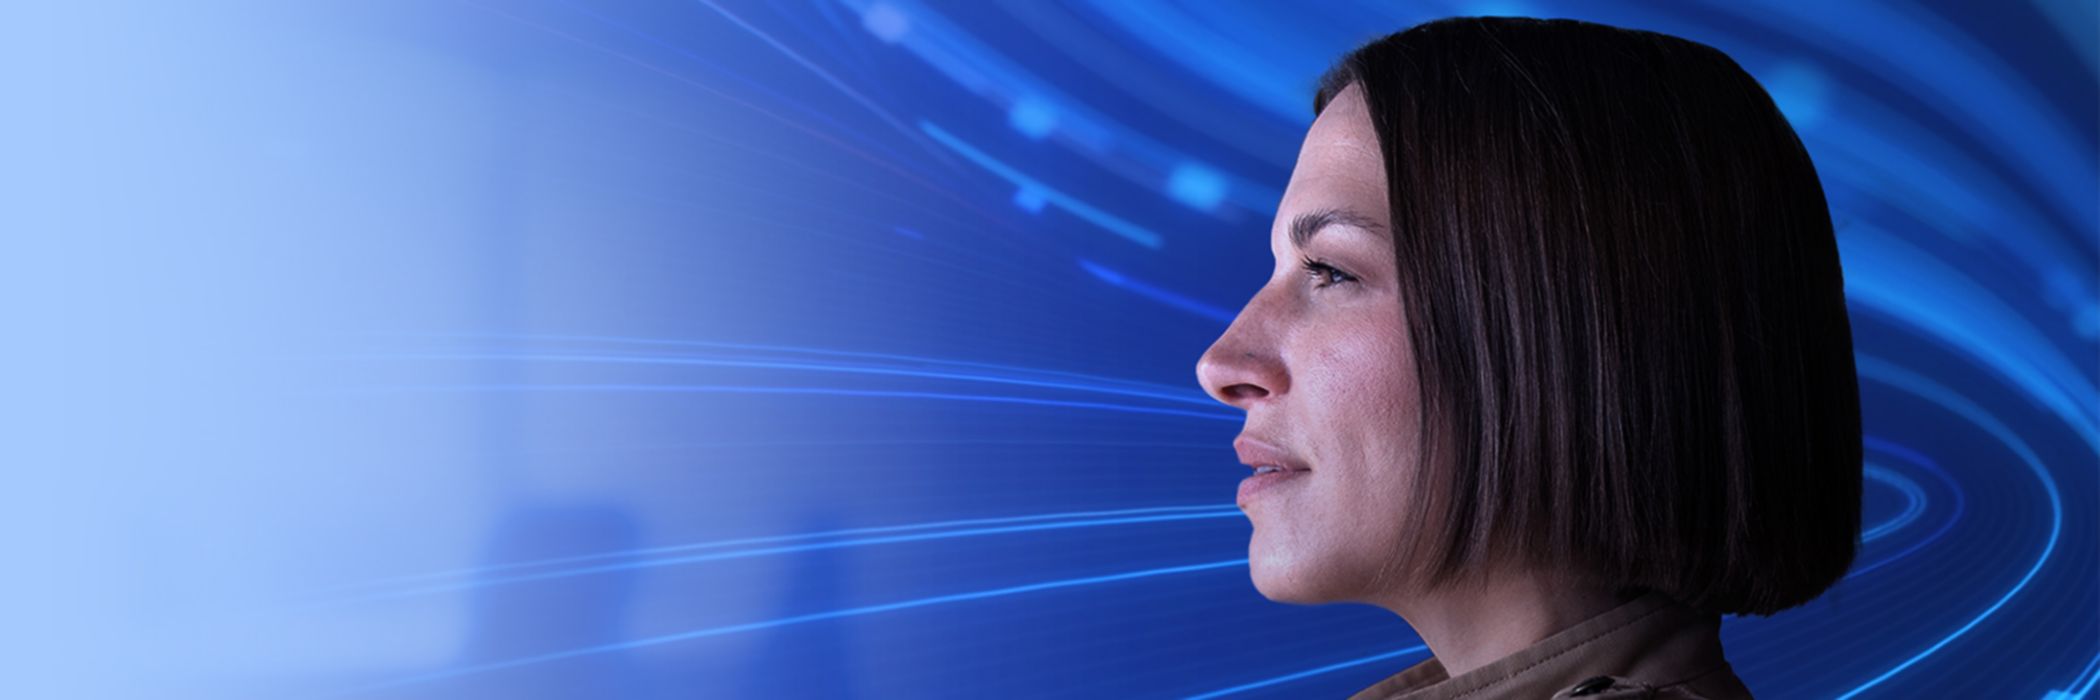 Side profile of woman with blue swirling data behind